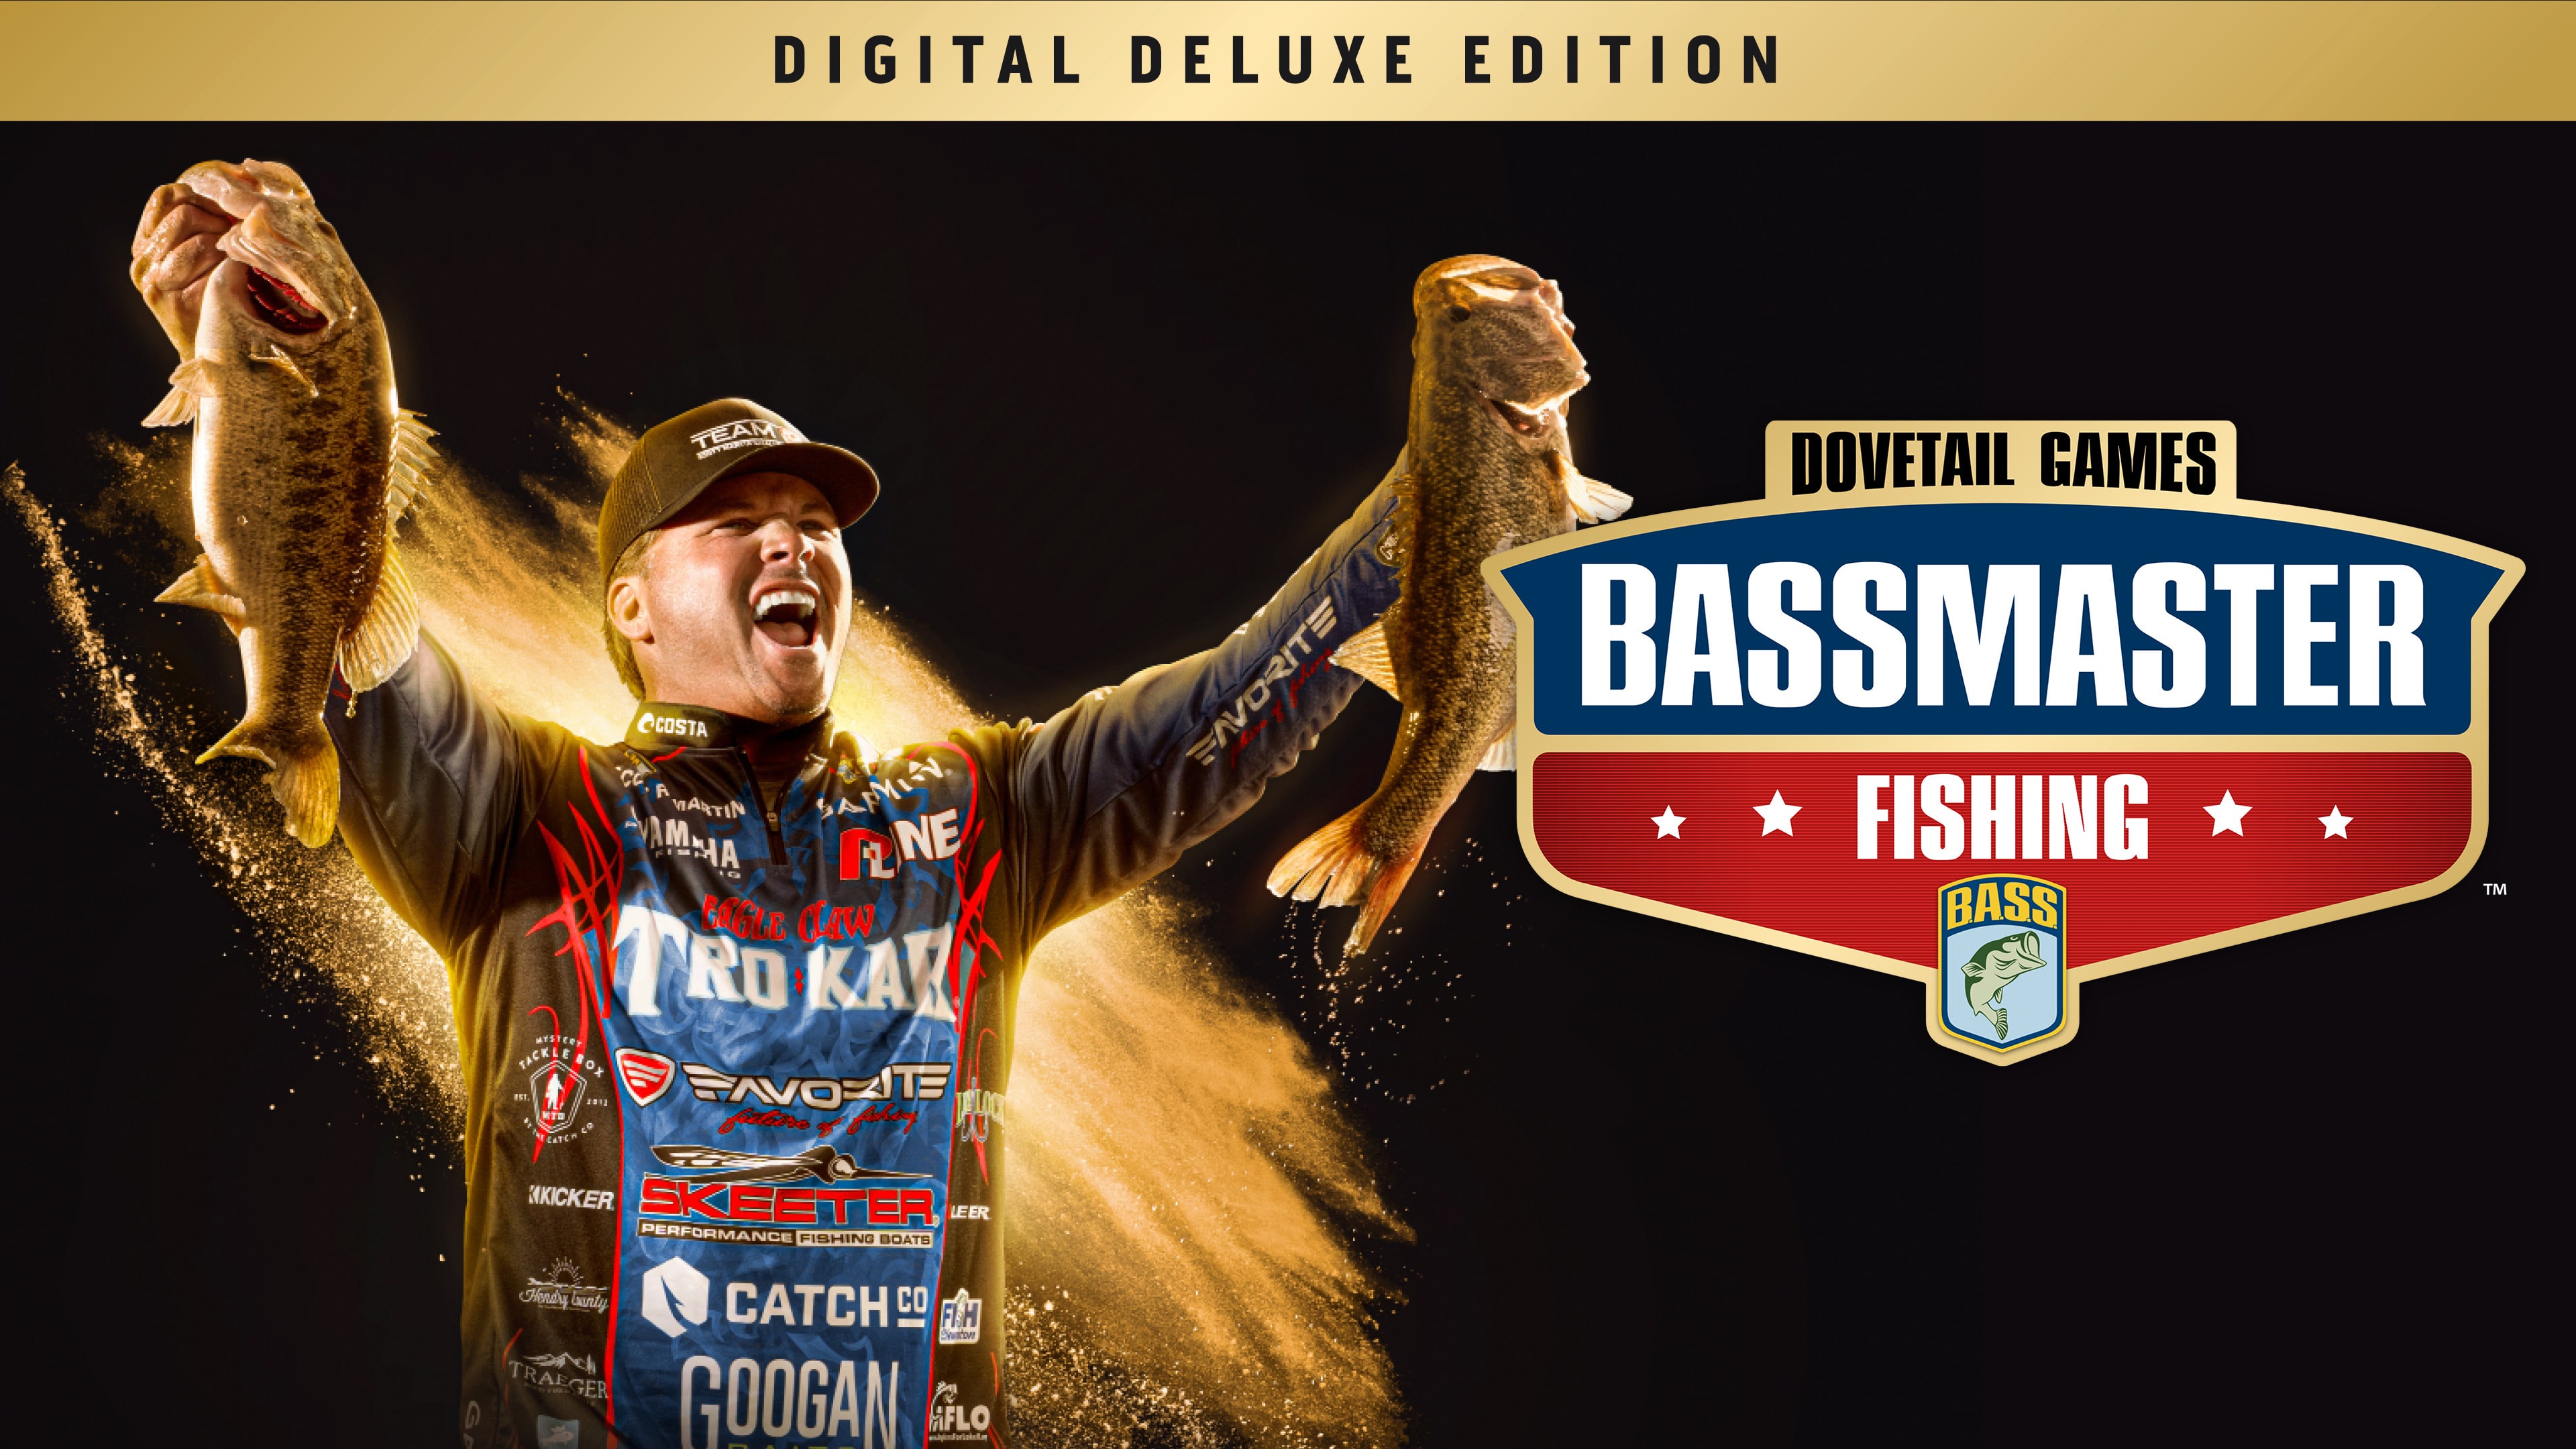 Bassmaster® Fishing: Deluxe Edition PS4™ and PS5™ (Simplified Chinese, English, Japanese)